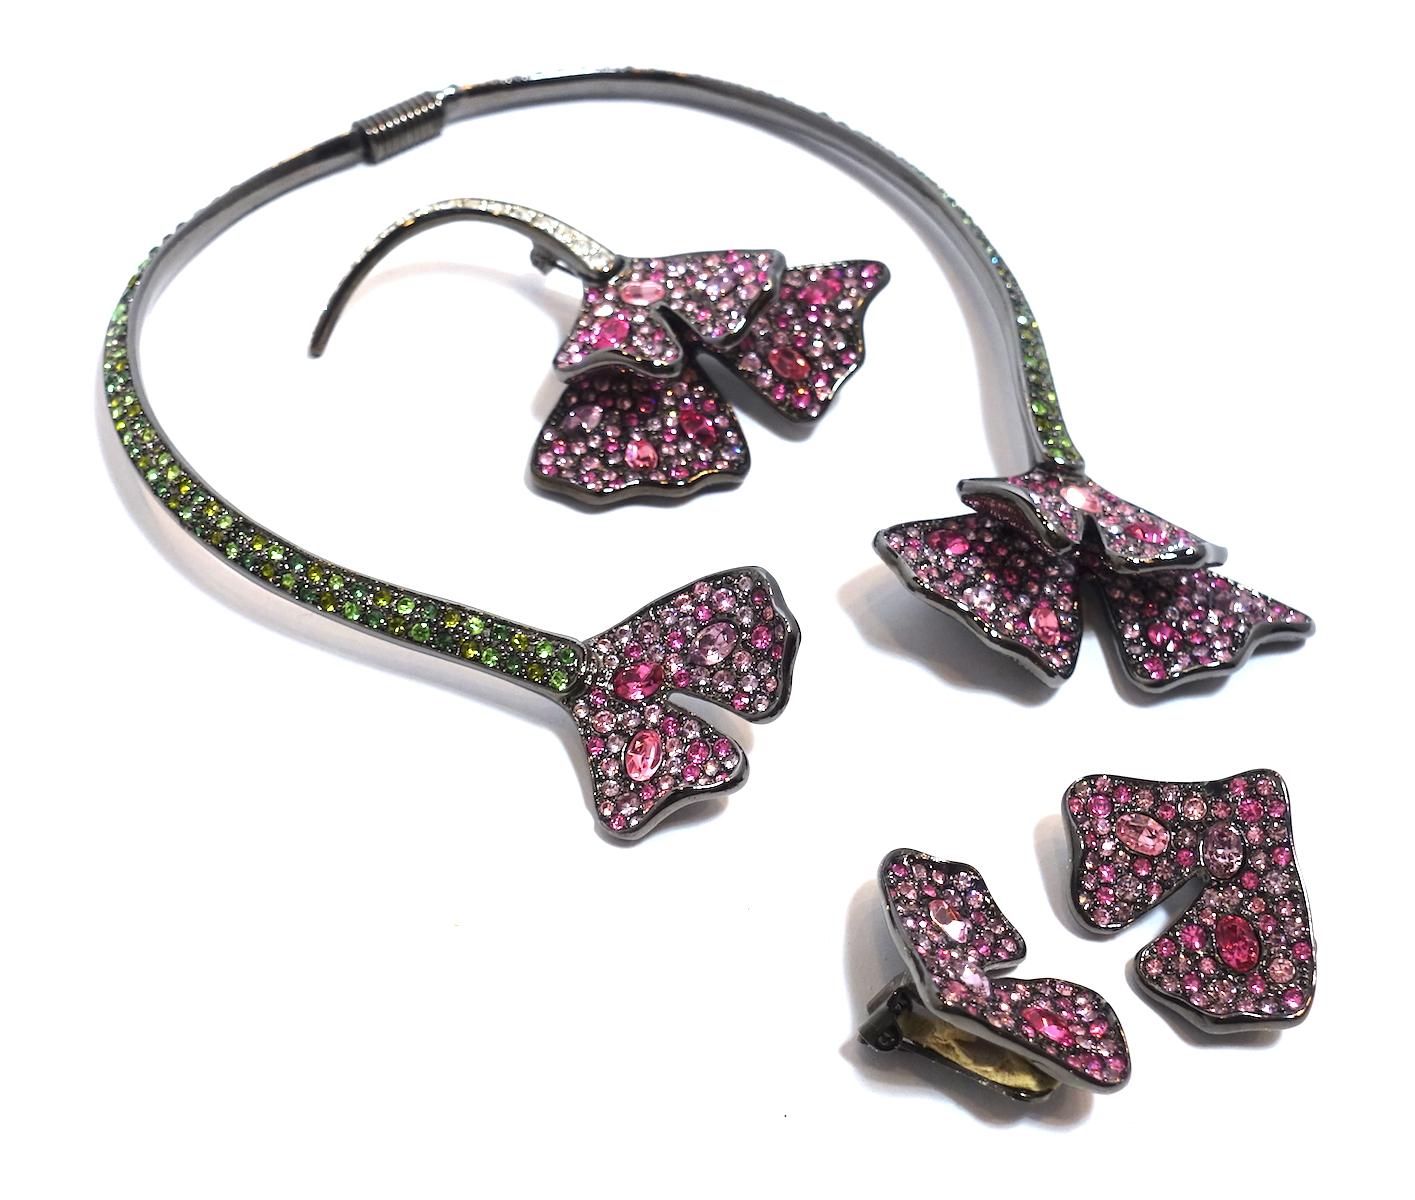 This signed Kenneth Lane parure features a floral design in with pink, green and clear crystal accents in a silver tone metal setting.  The necklace/collar has a flexible spring back for easy wear and measures 15” around the inside.  The clip